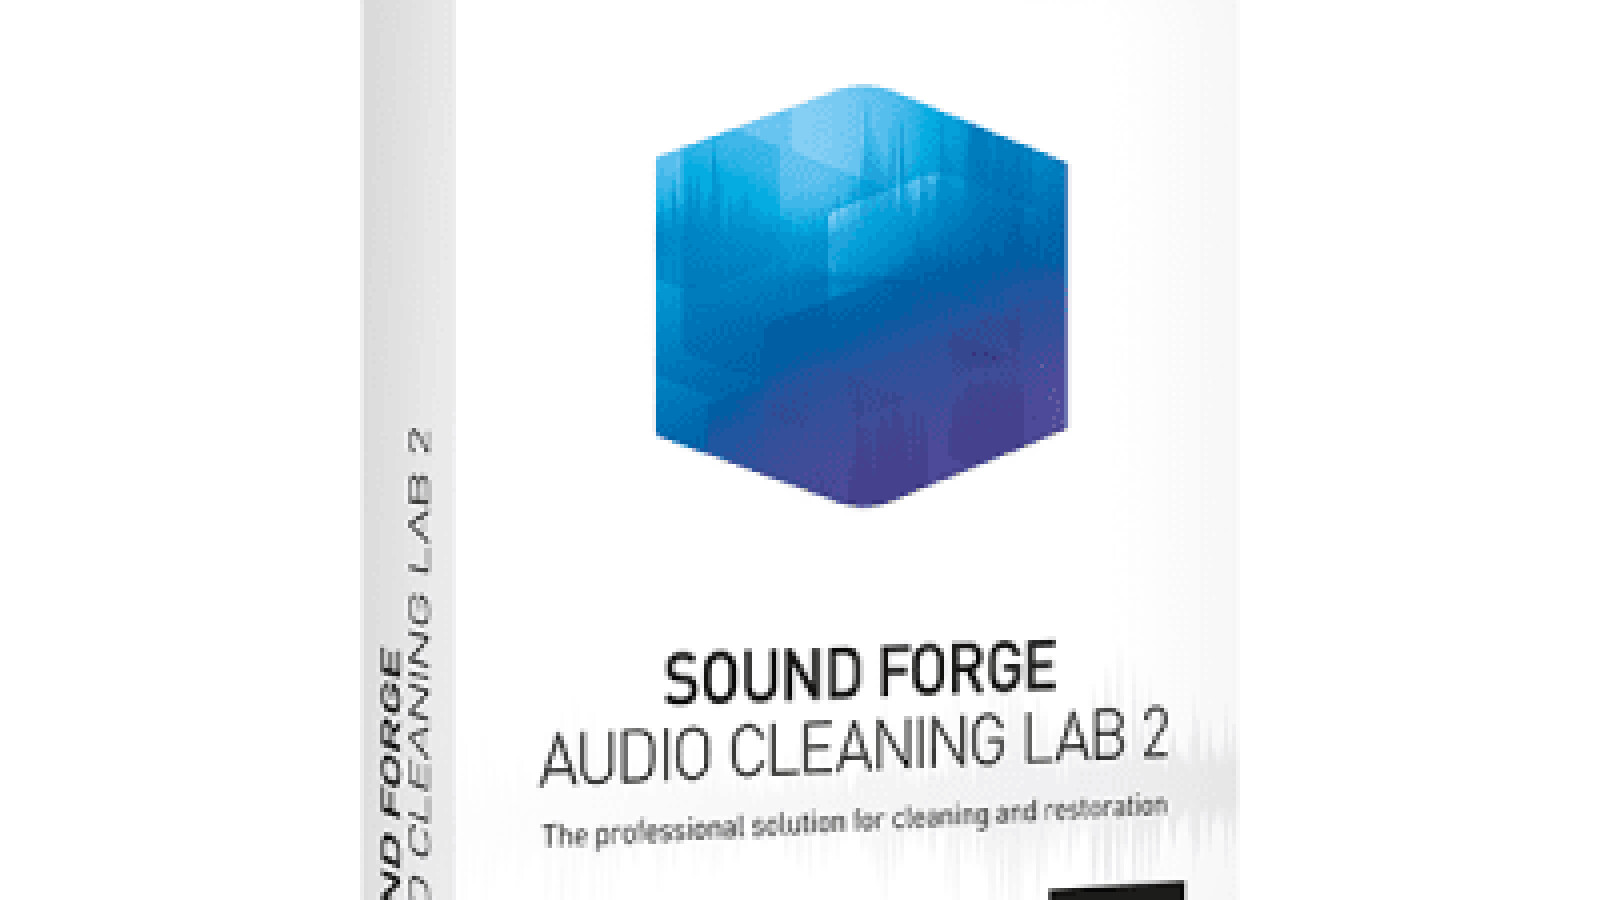 is sound forge 8 compatible with windows 7